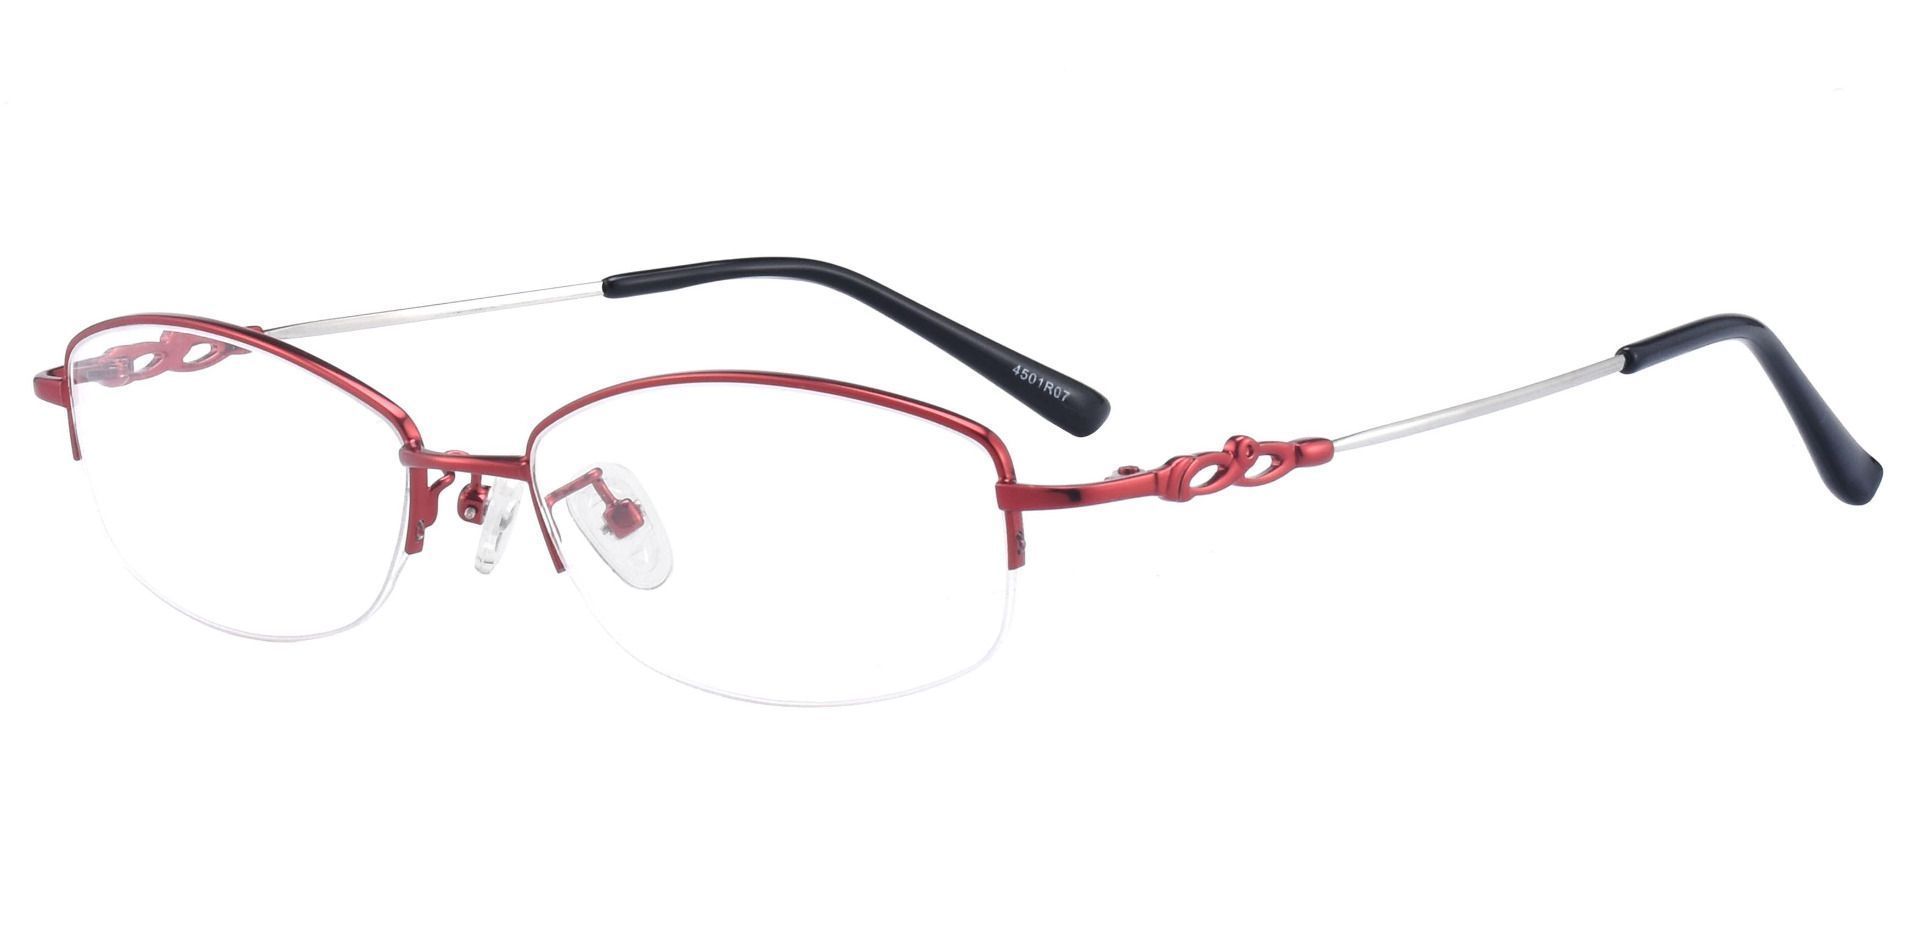 Meadowsweet Oval Non-Rx Glasses - Red